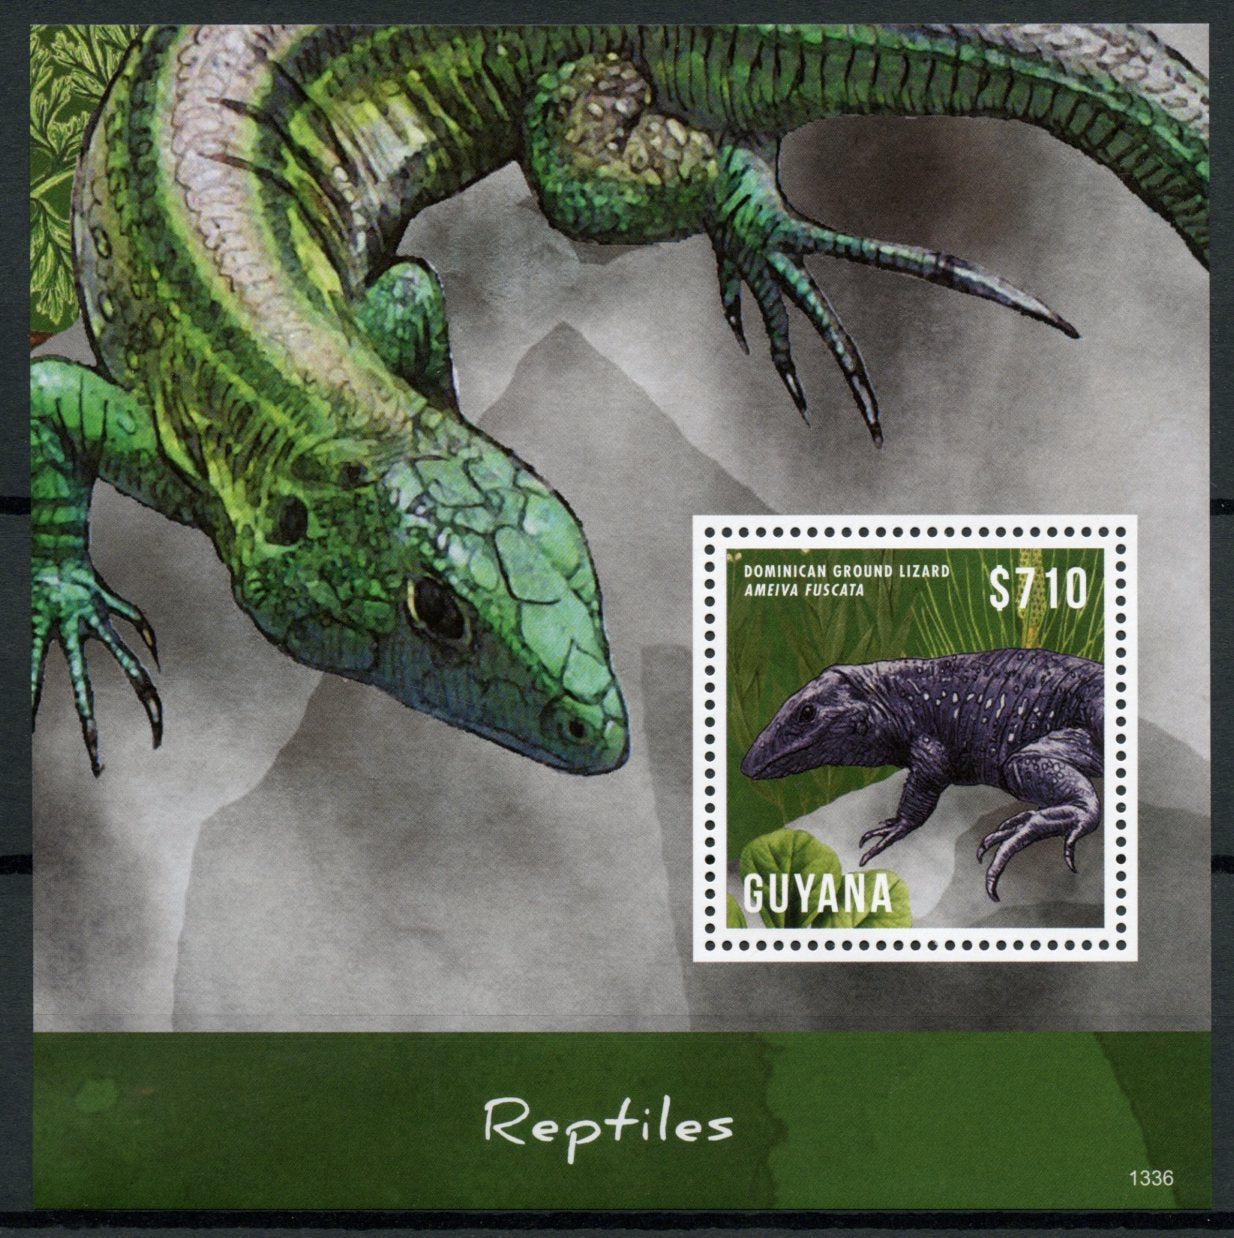 Guyana 2013 MNH Reptiles Stamps Dominican Ground Lizard Lizards 1v S/S